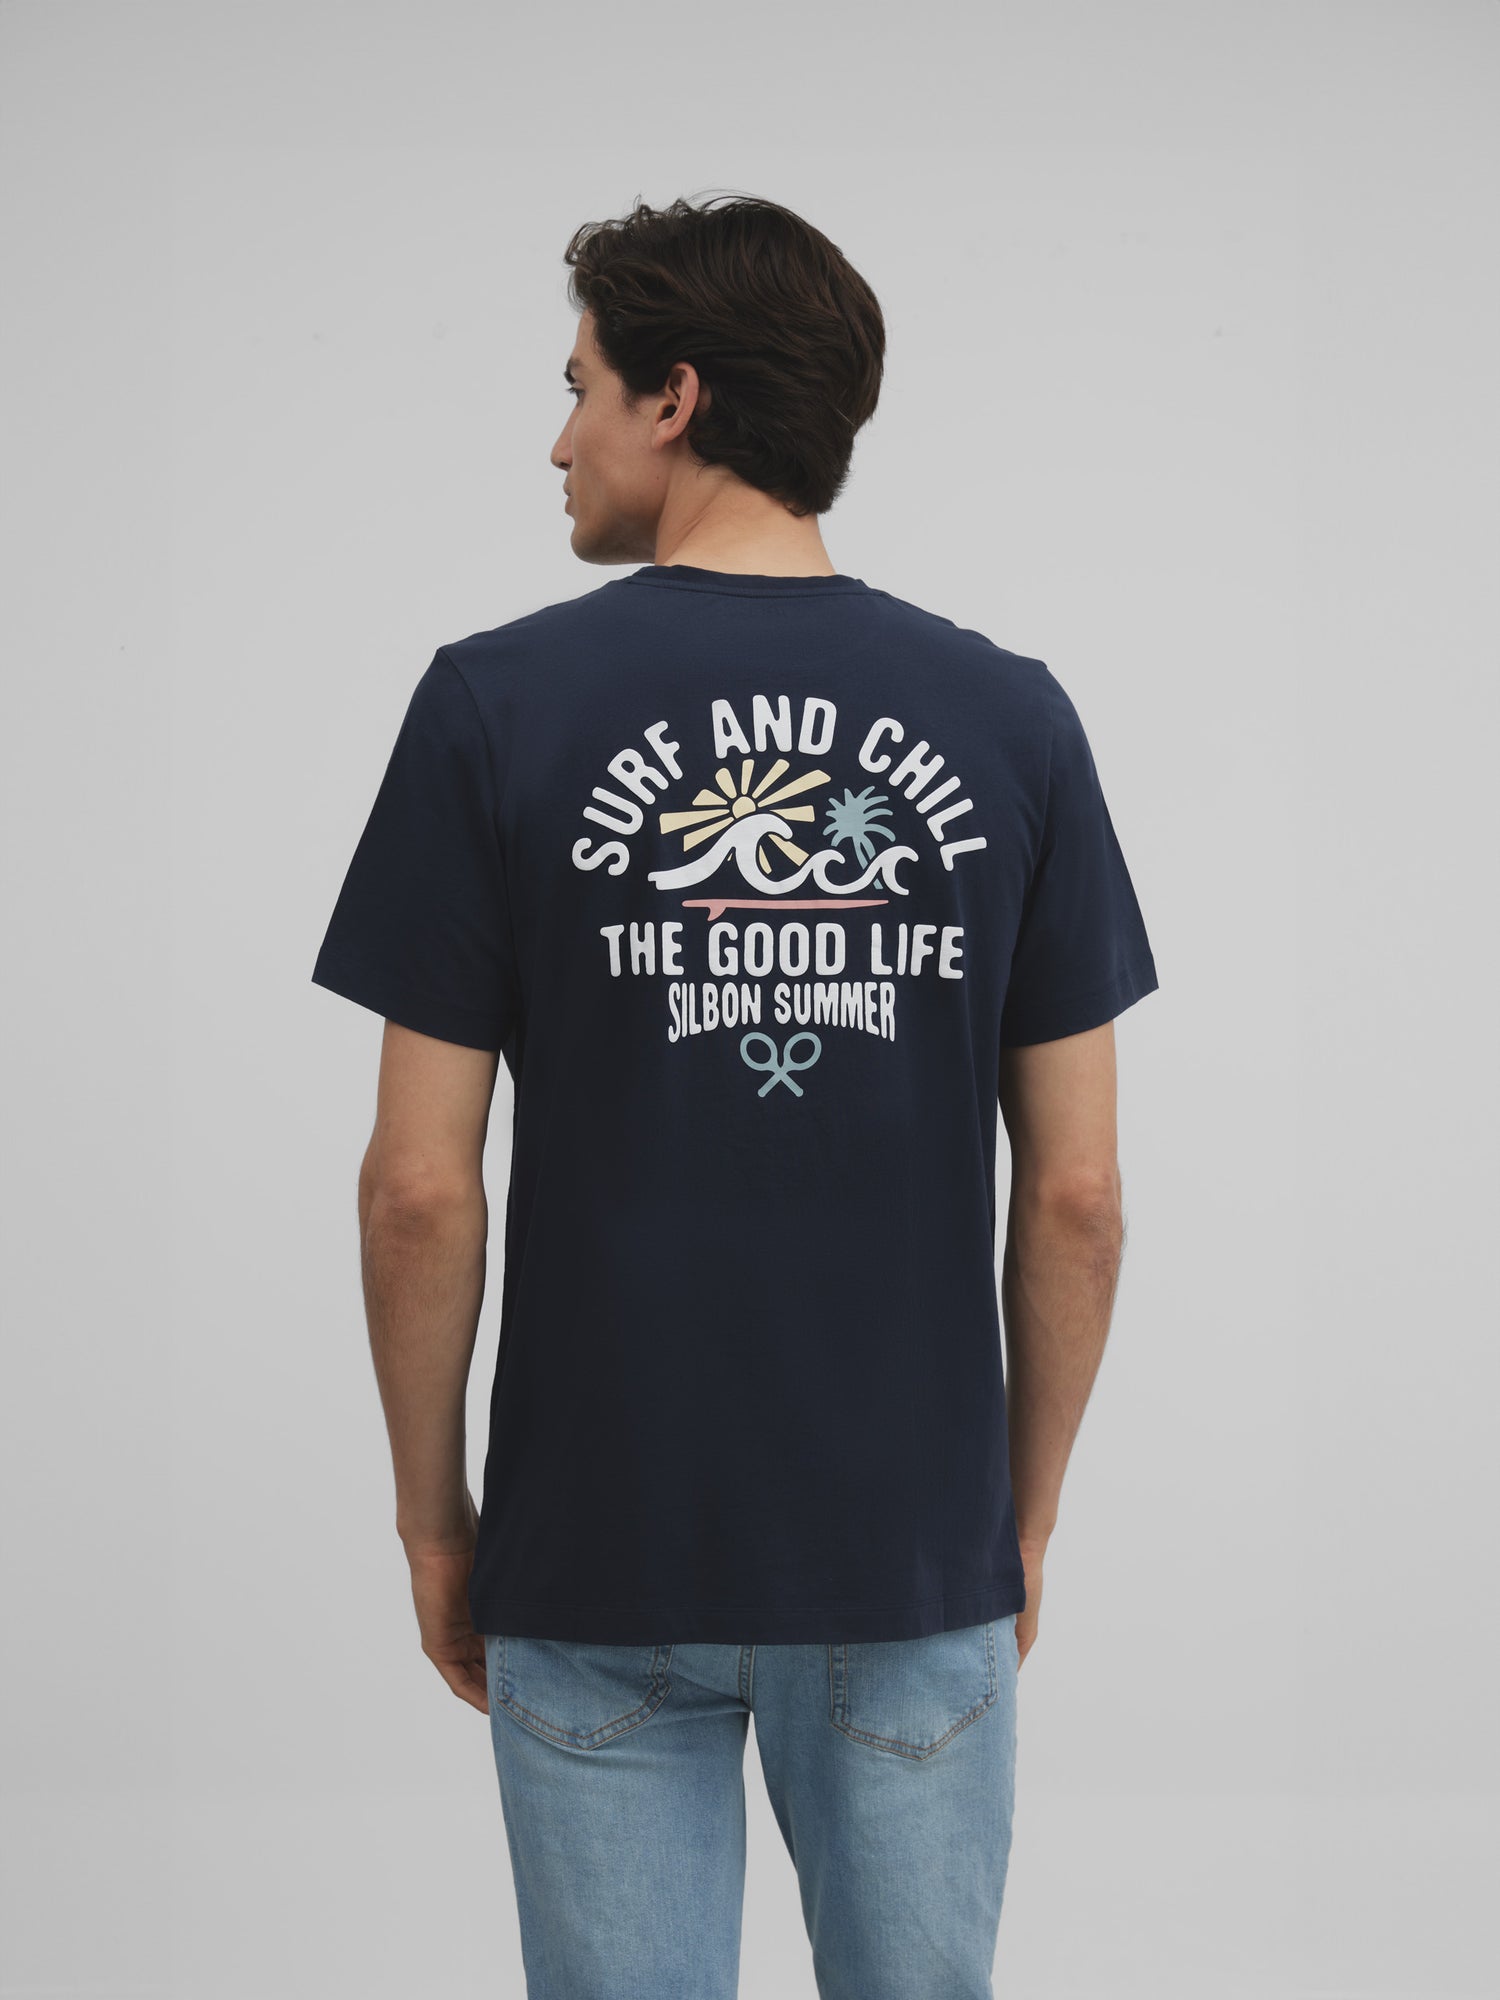 Navy blue surf and chill t-shirt